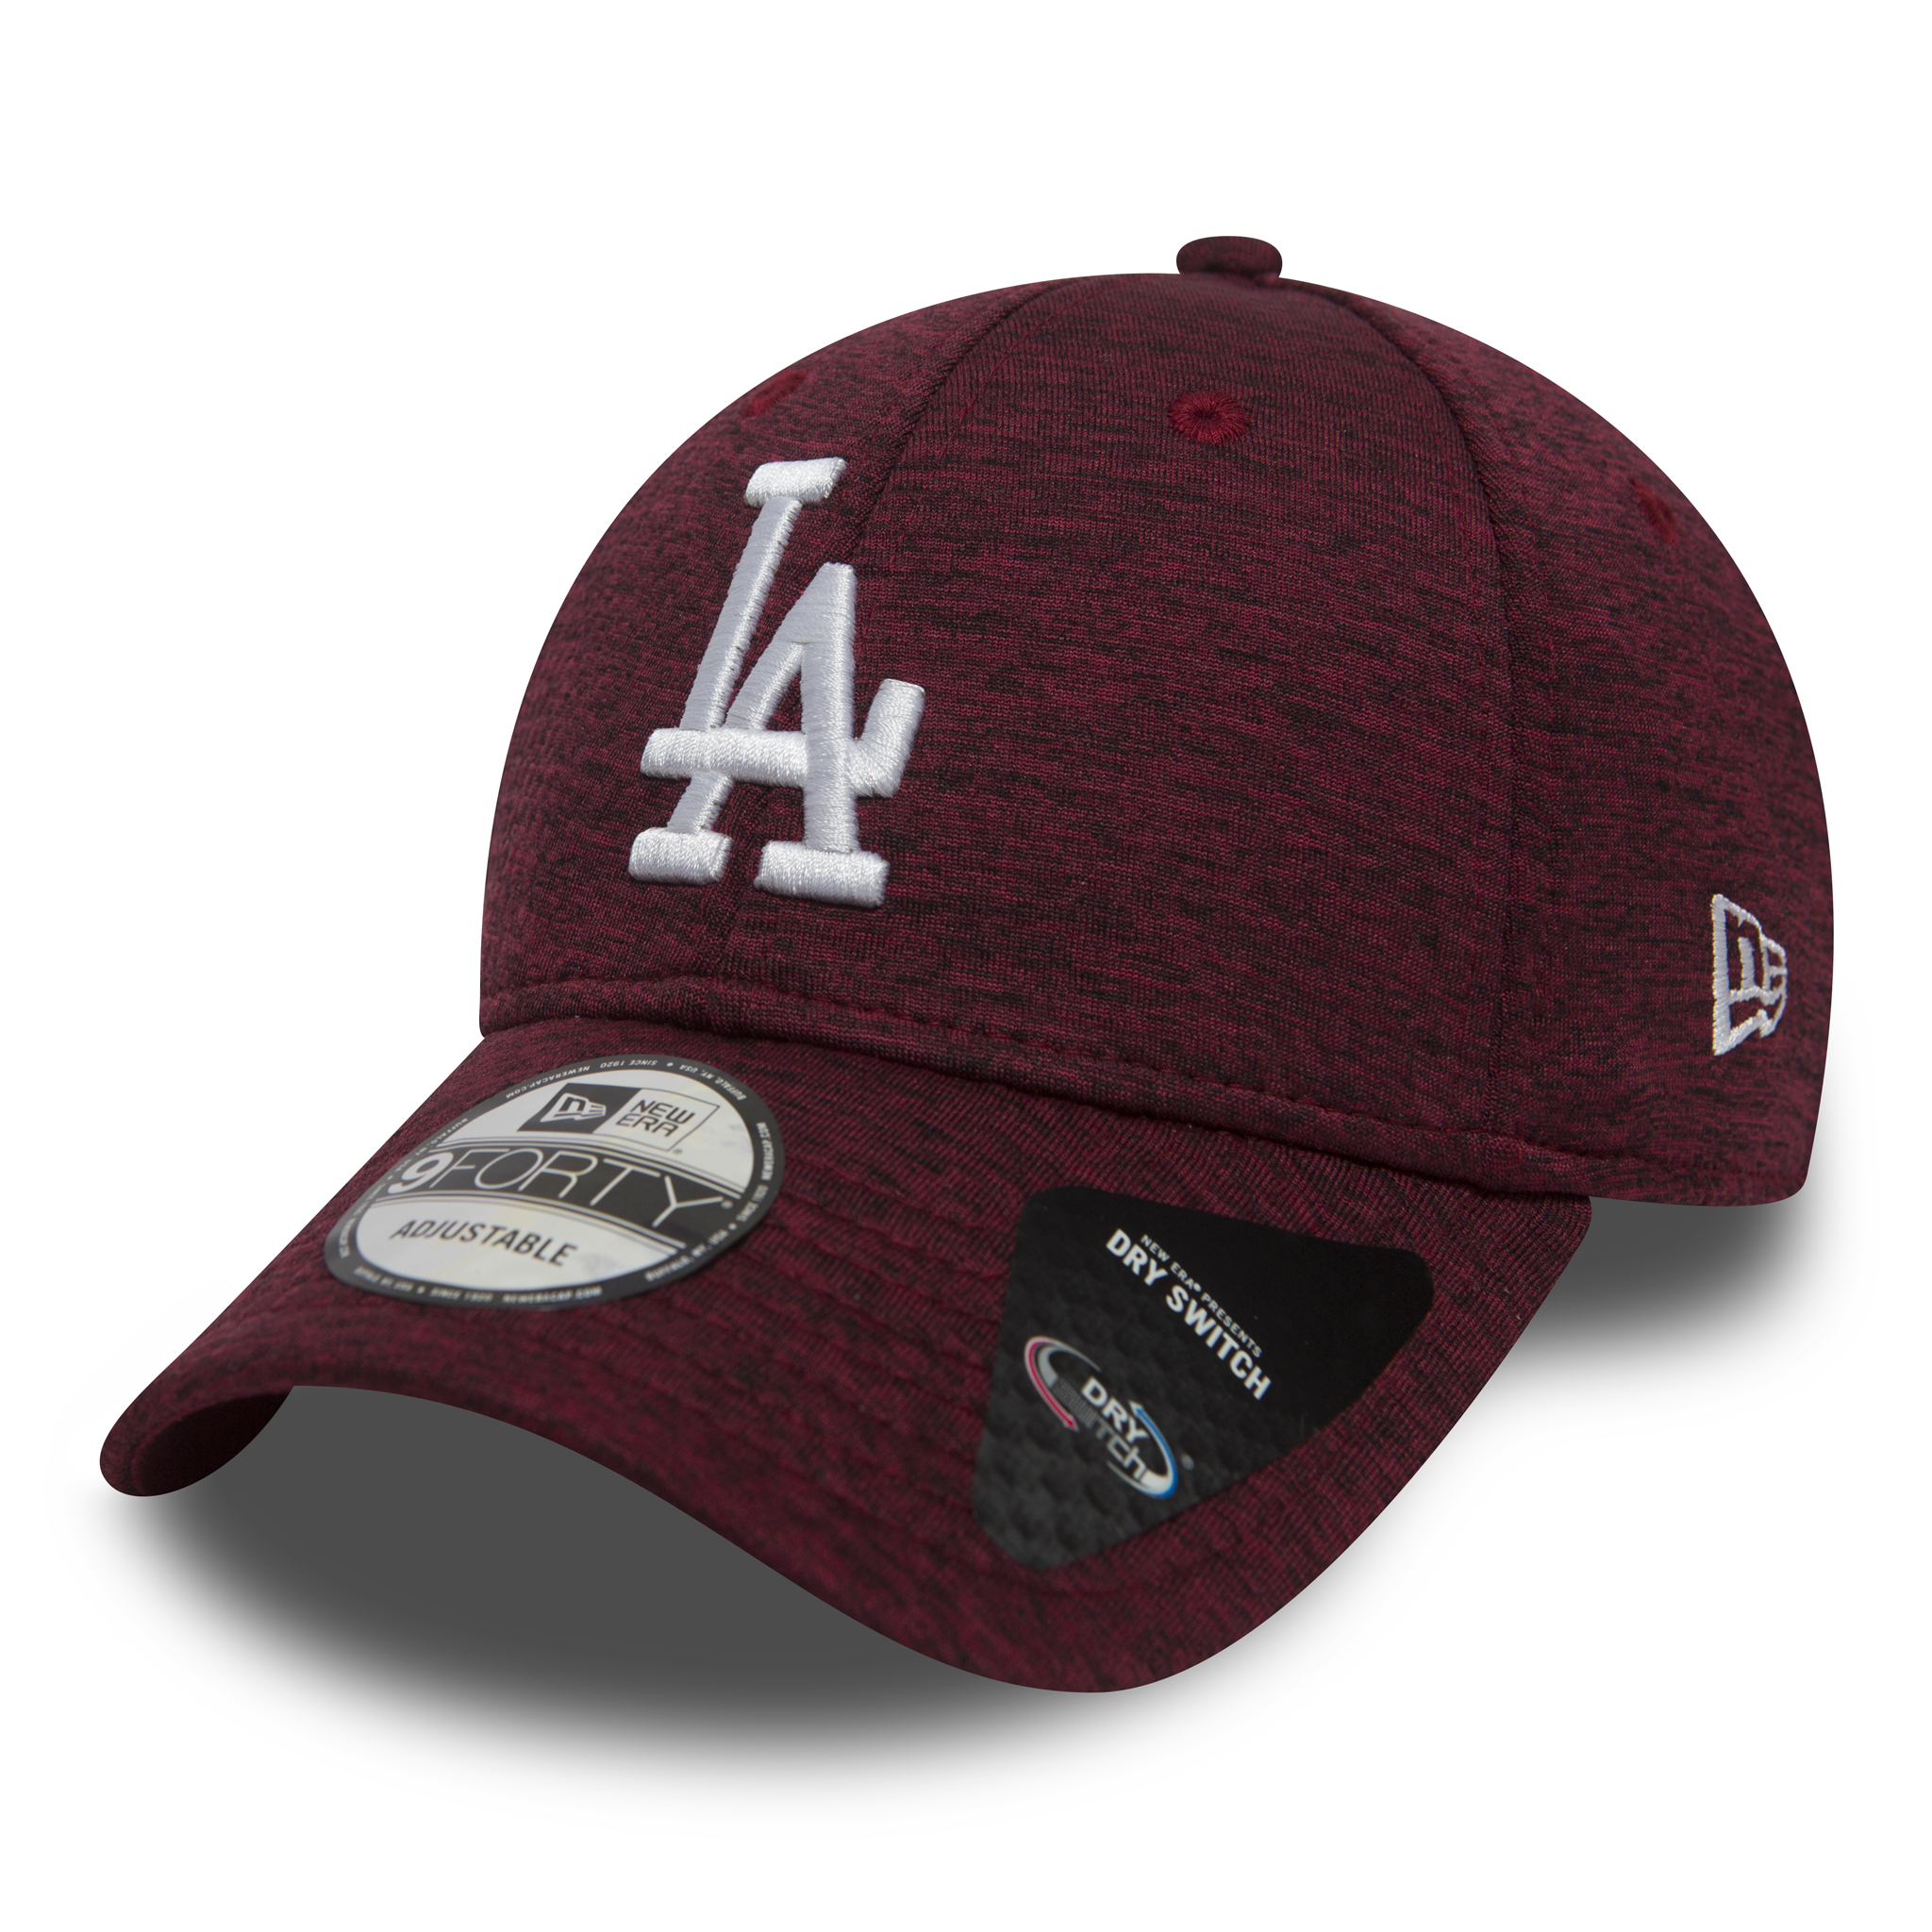 Los Angeles Dodgers Cardinal 9FORTY Cap